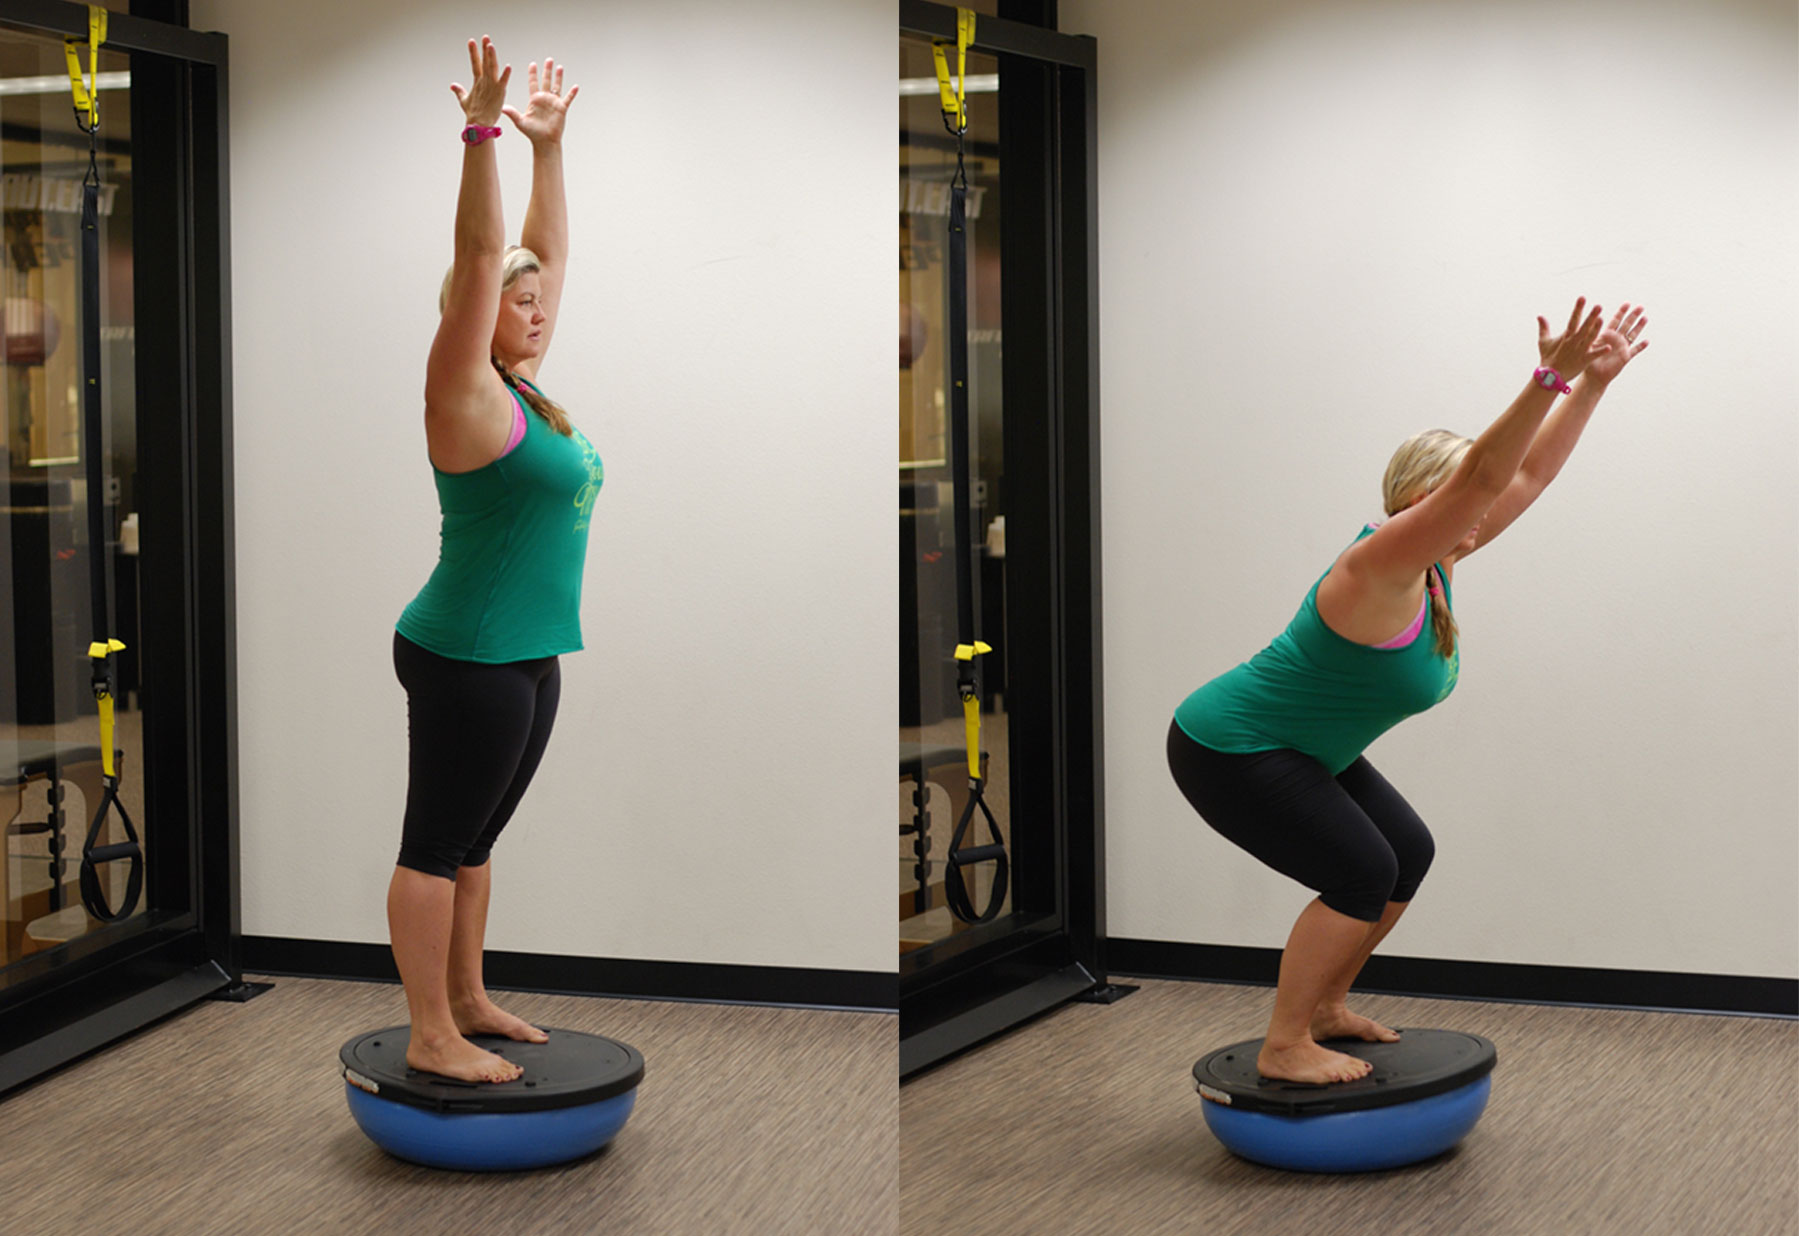 Try This: How to do a BOSU® Ball Squat - ABC Fitness Studio